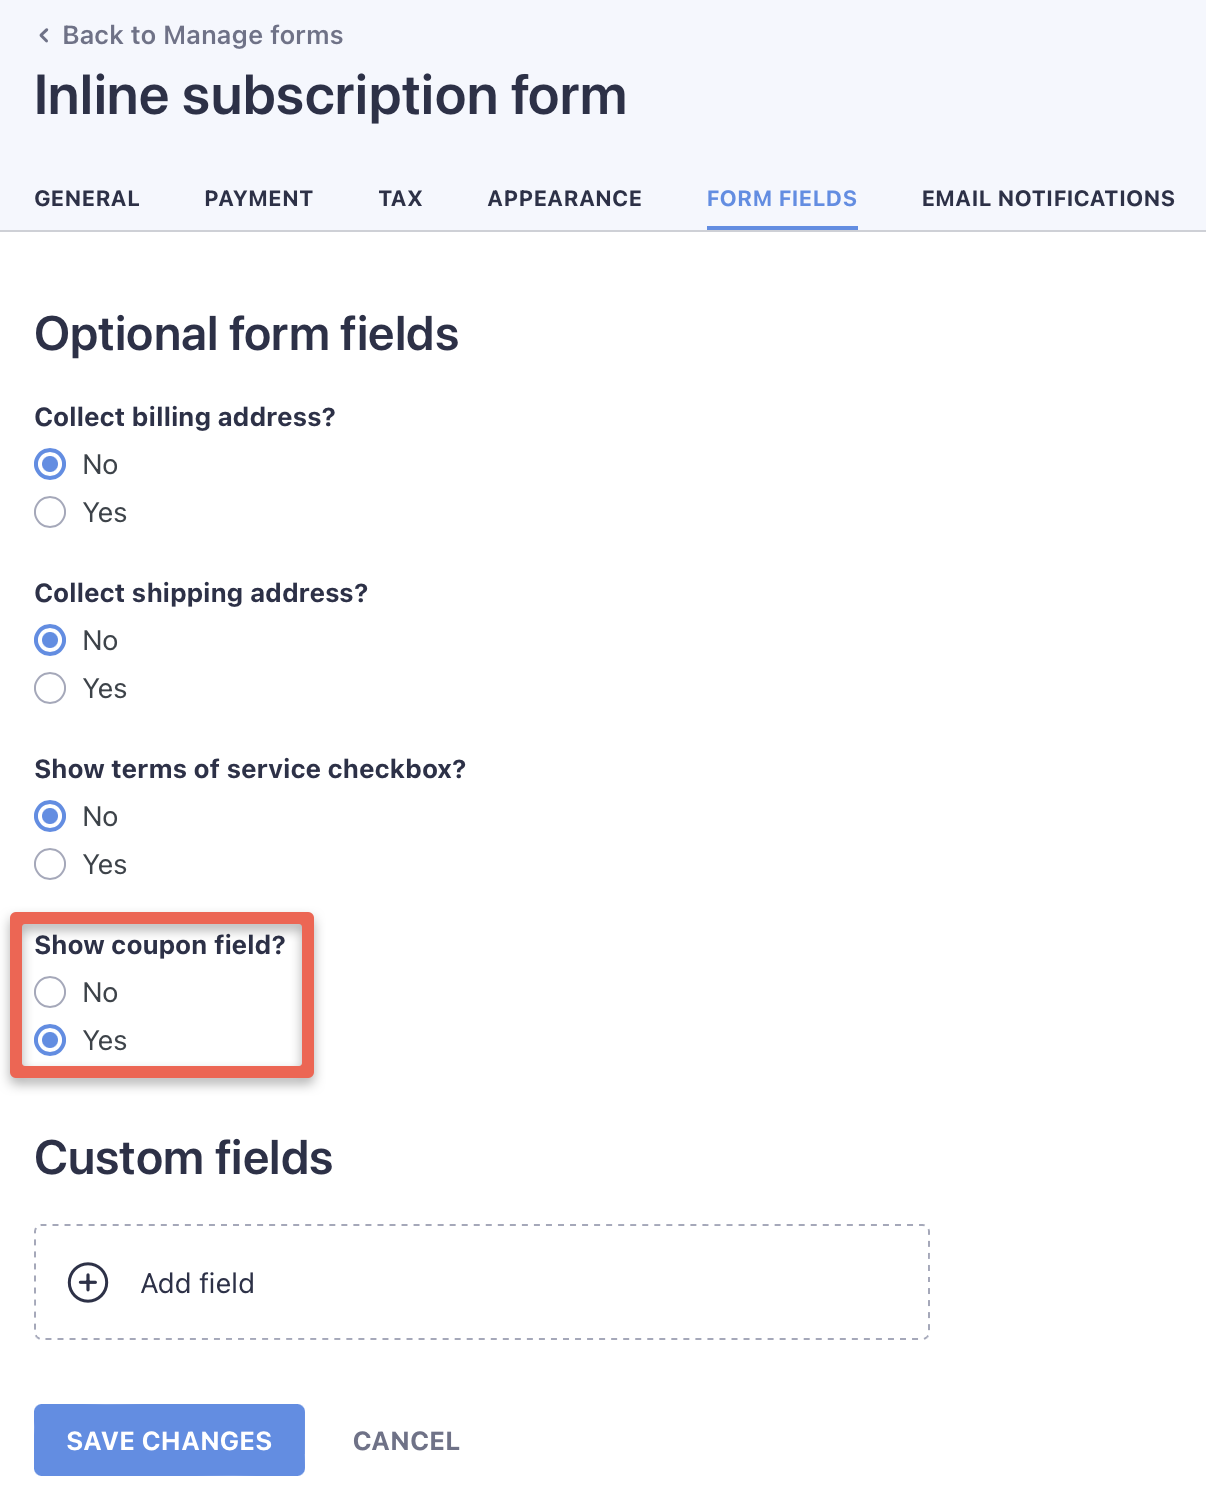 In WP Full Pay, you can decide on a per-form basis if you want to show a coupon field.